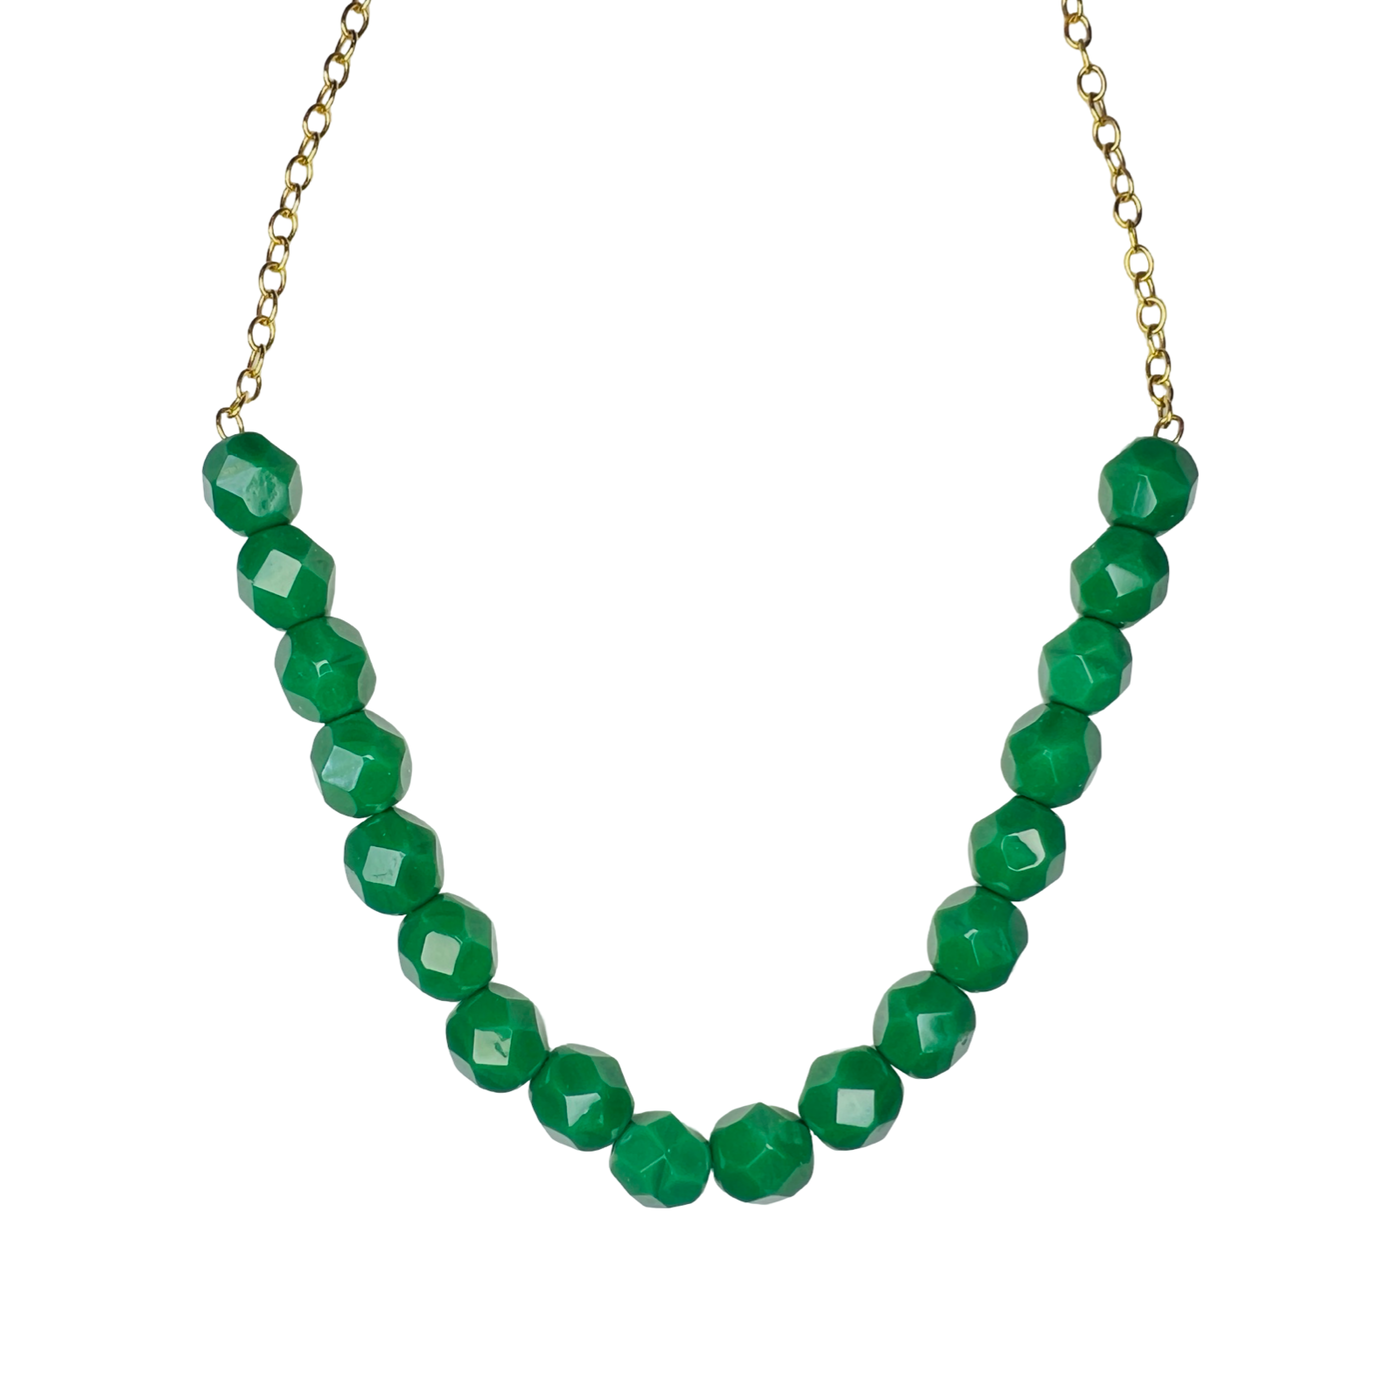 Green bead necklace with a gold chain